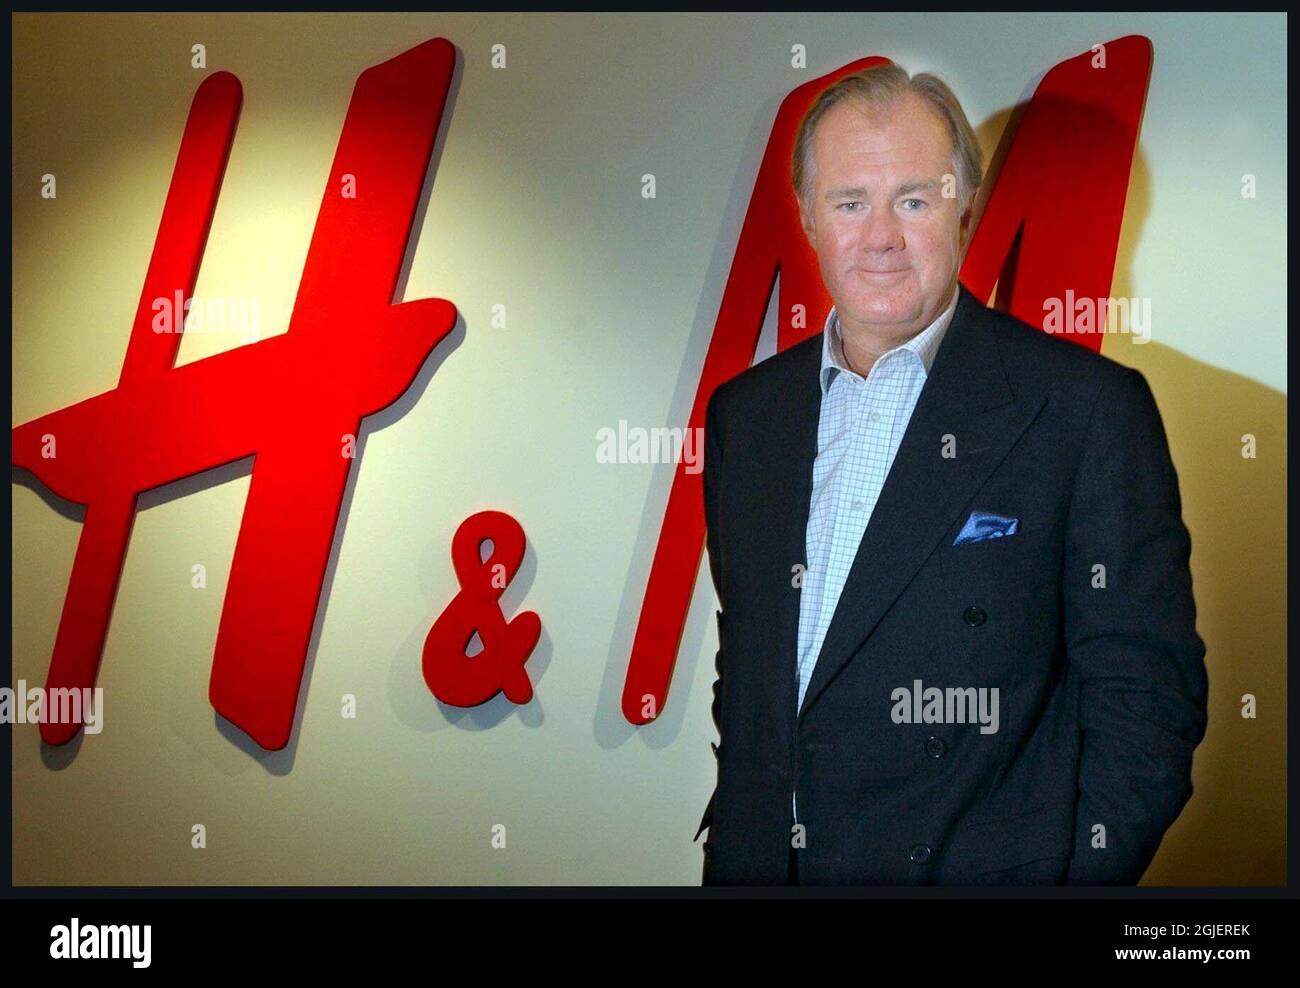 Stefan Persson, chairman of the board of the Swedish retail ready-made  clothing giant Hennes & Mauritz or H&M. Stefan Persson is the principal  owner of the company and son to the founder